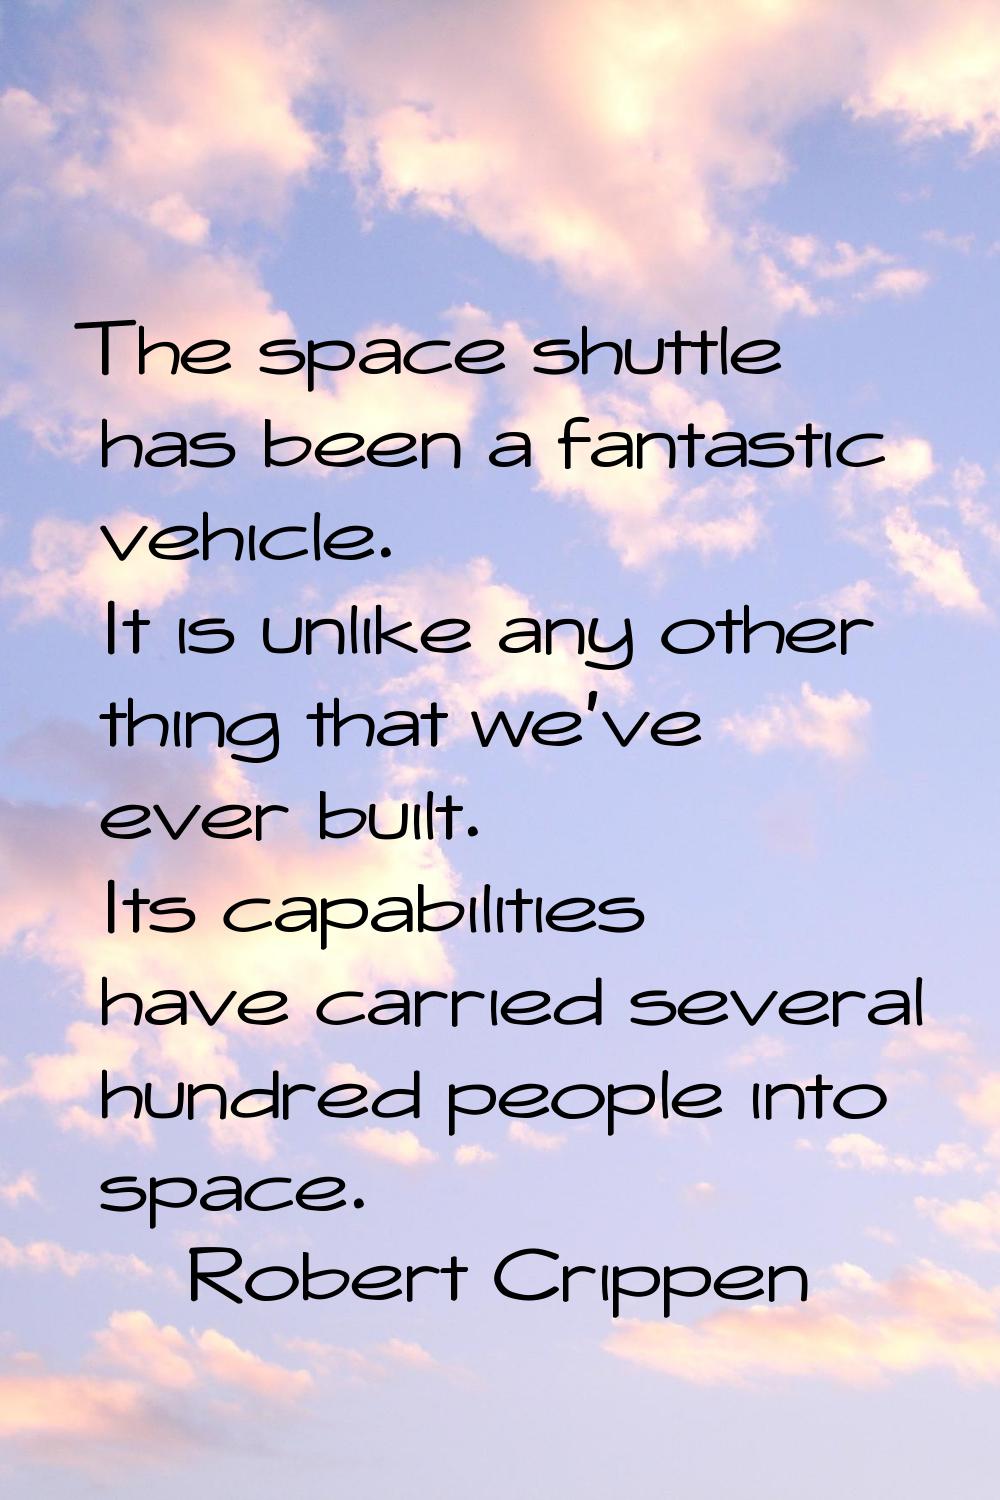 The space shuttle has been a fantastic vehicle. It is unlike any other thing that we've ever built.